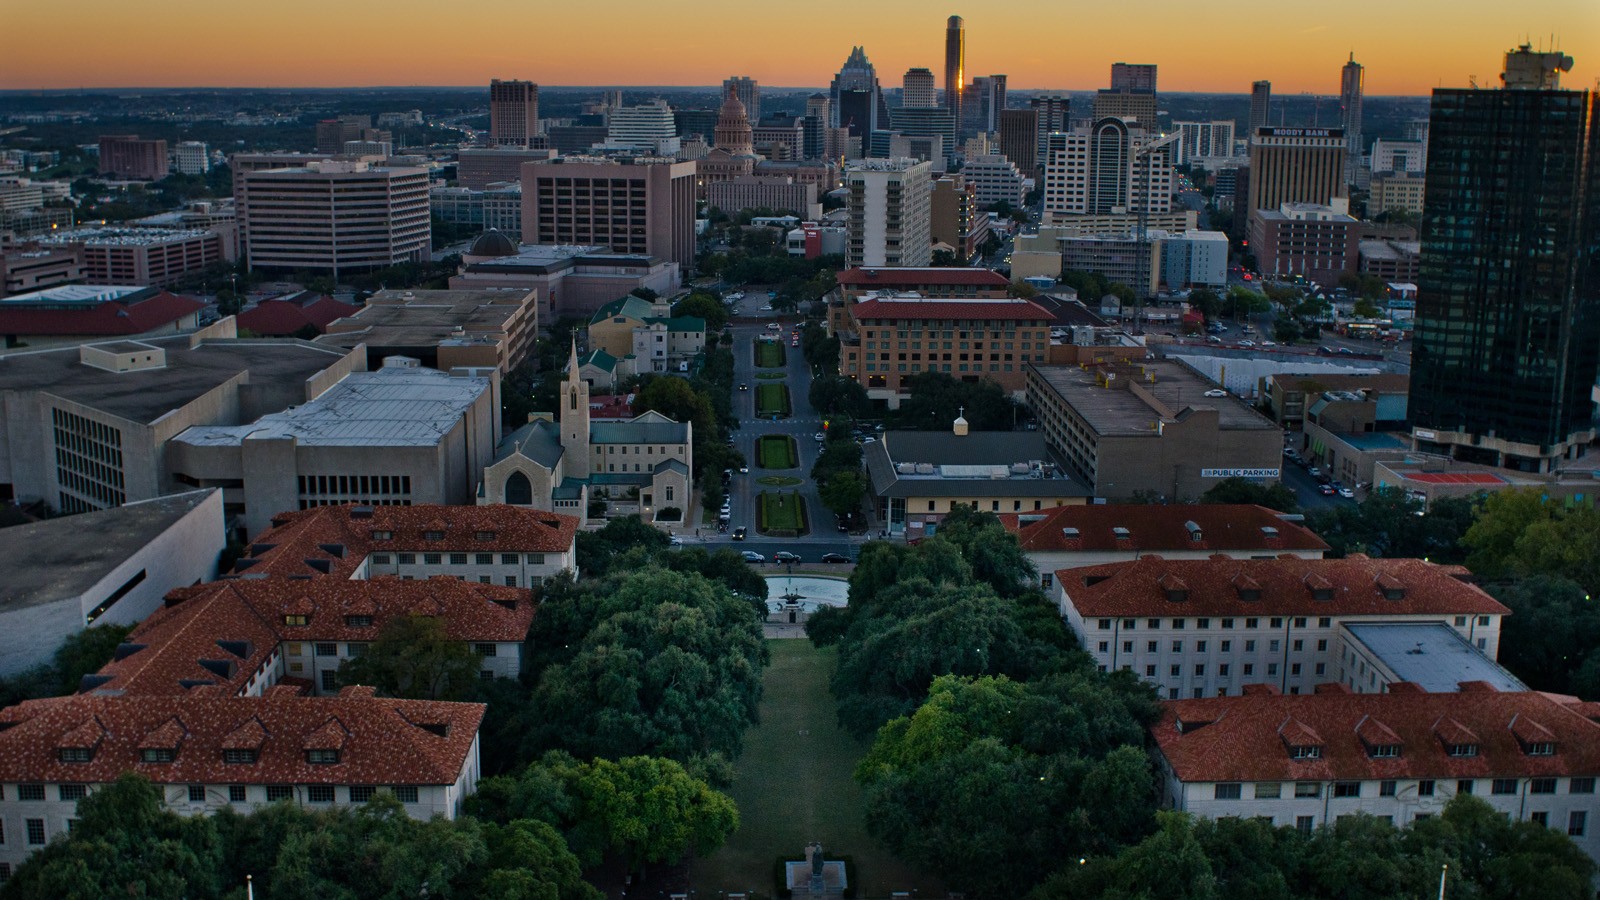 Sunset from the University of Texas at Austin Tower